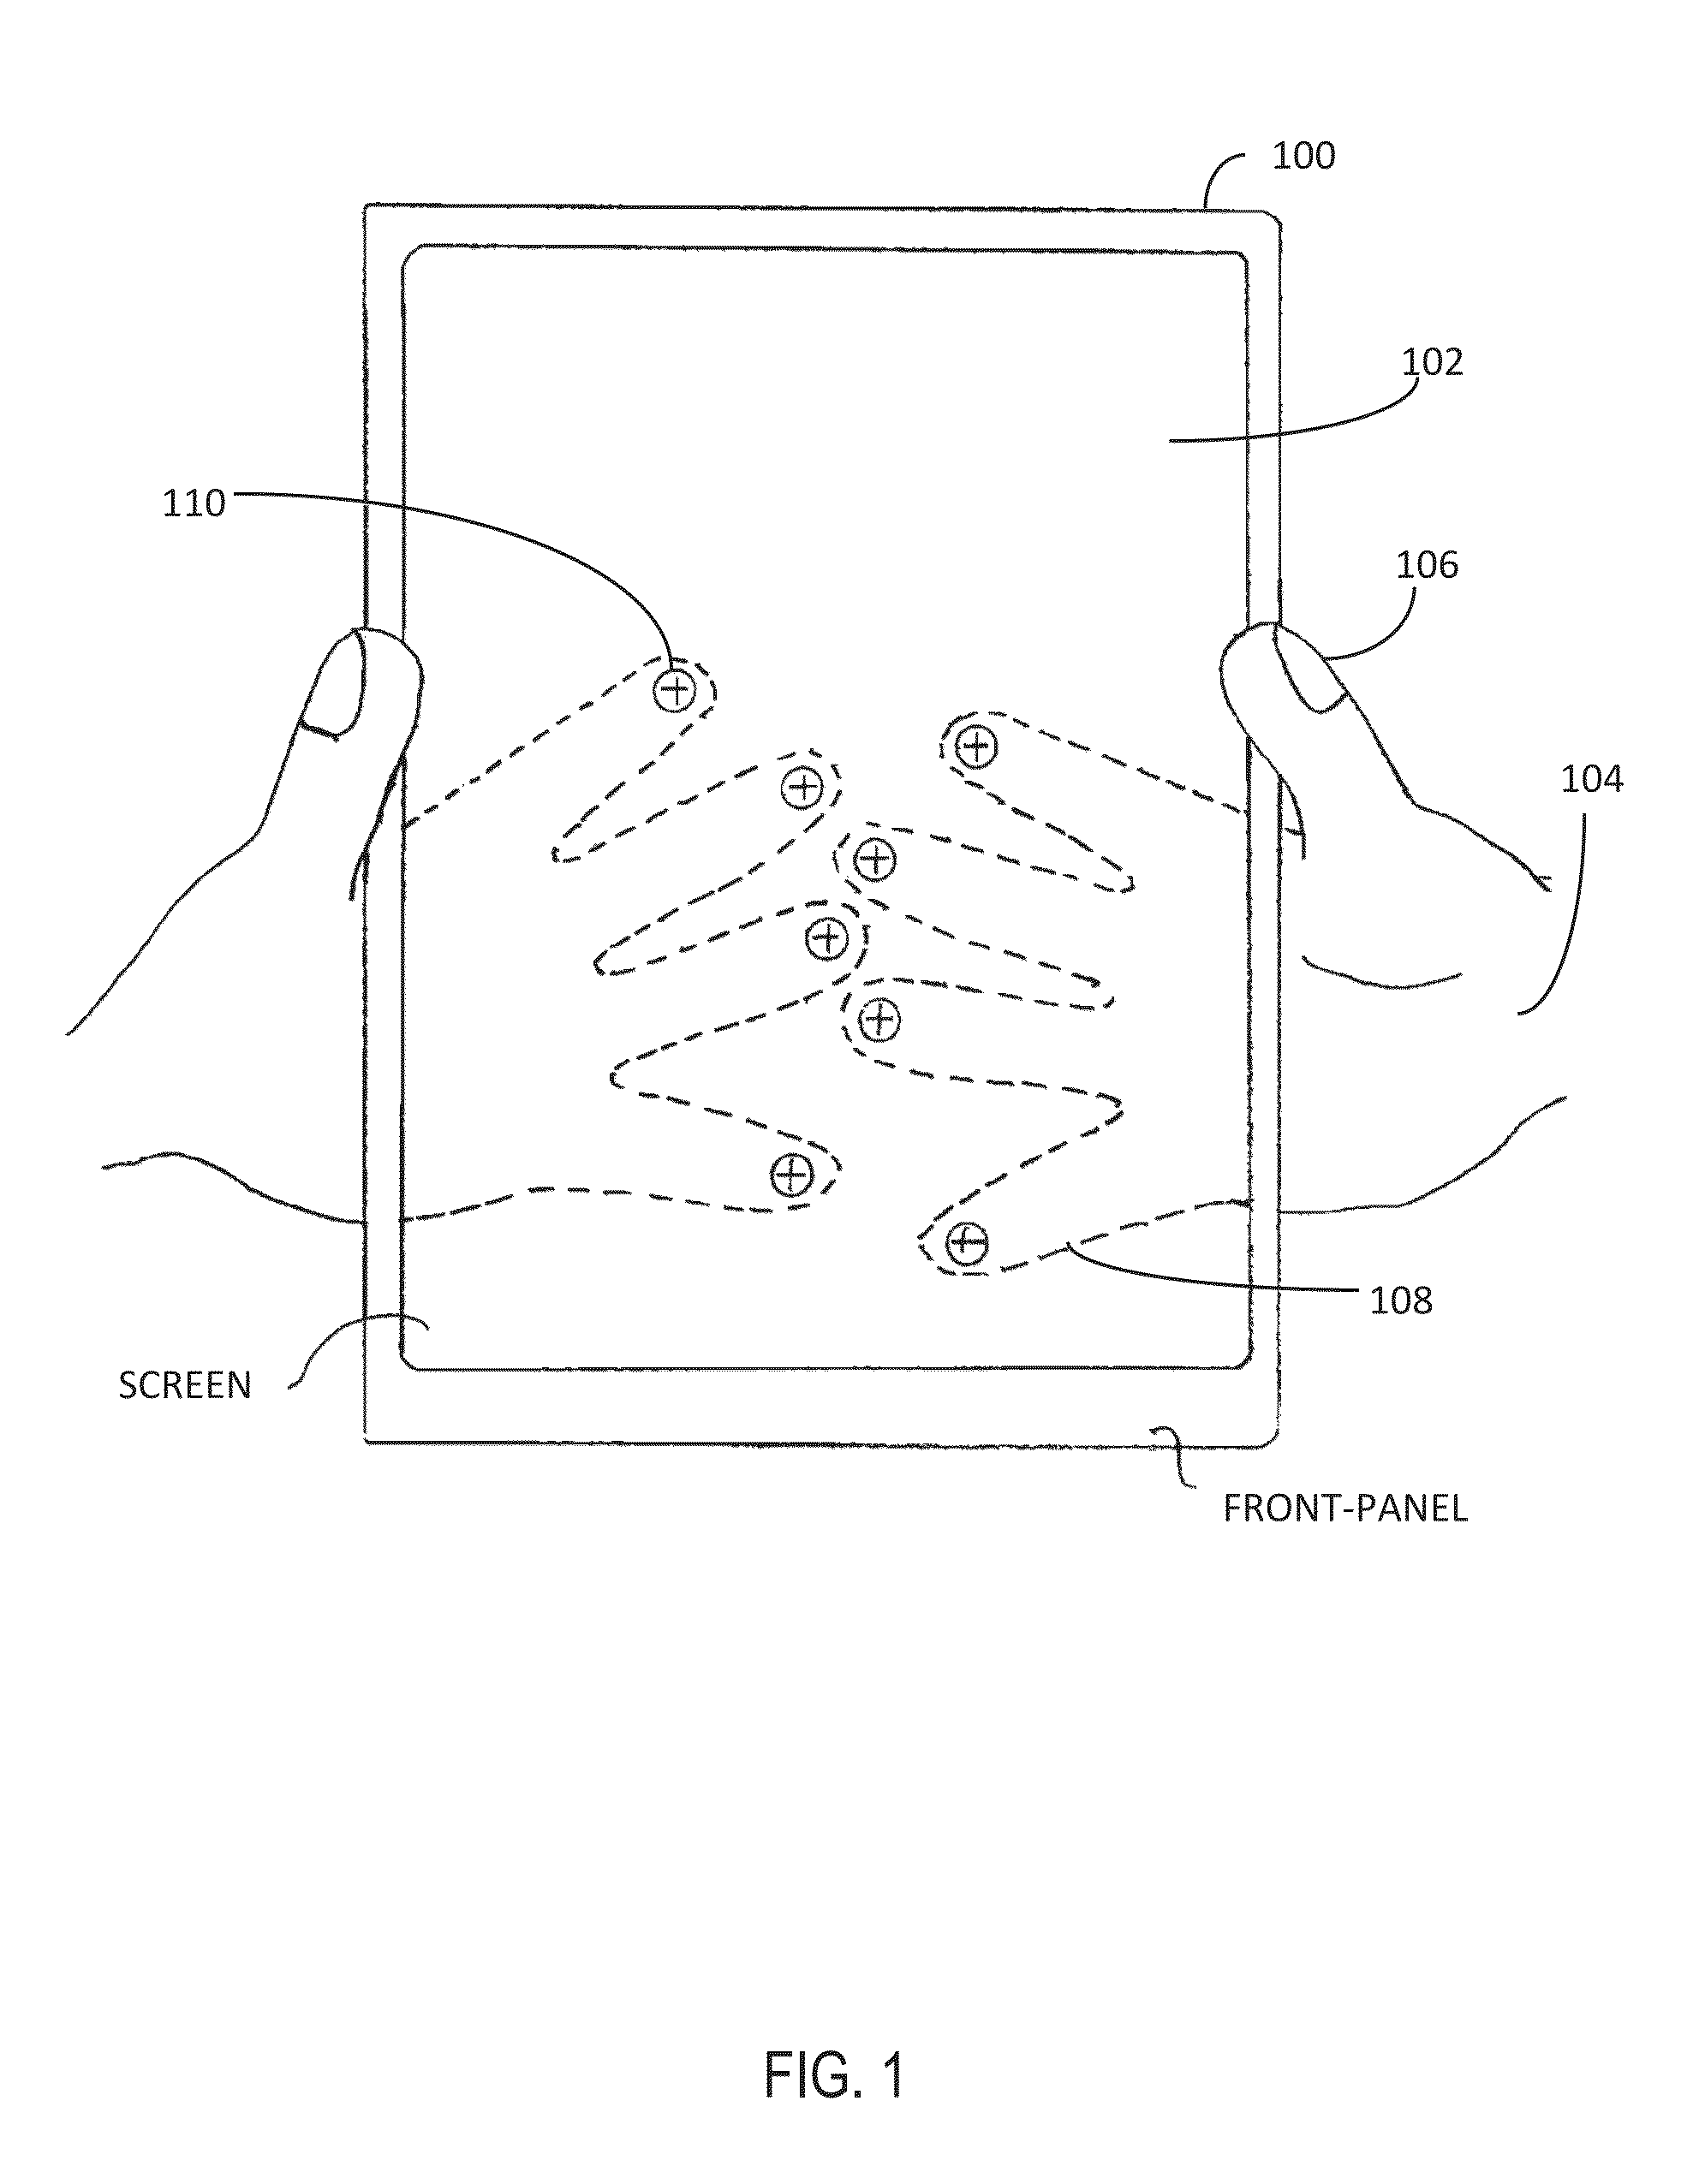 Method for controlling a virtual keyboard from a touchpad of a computerized device